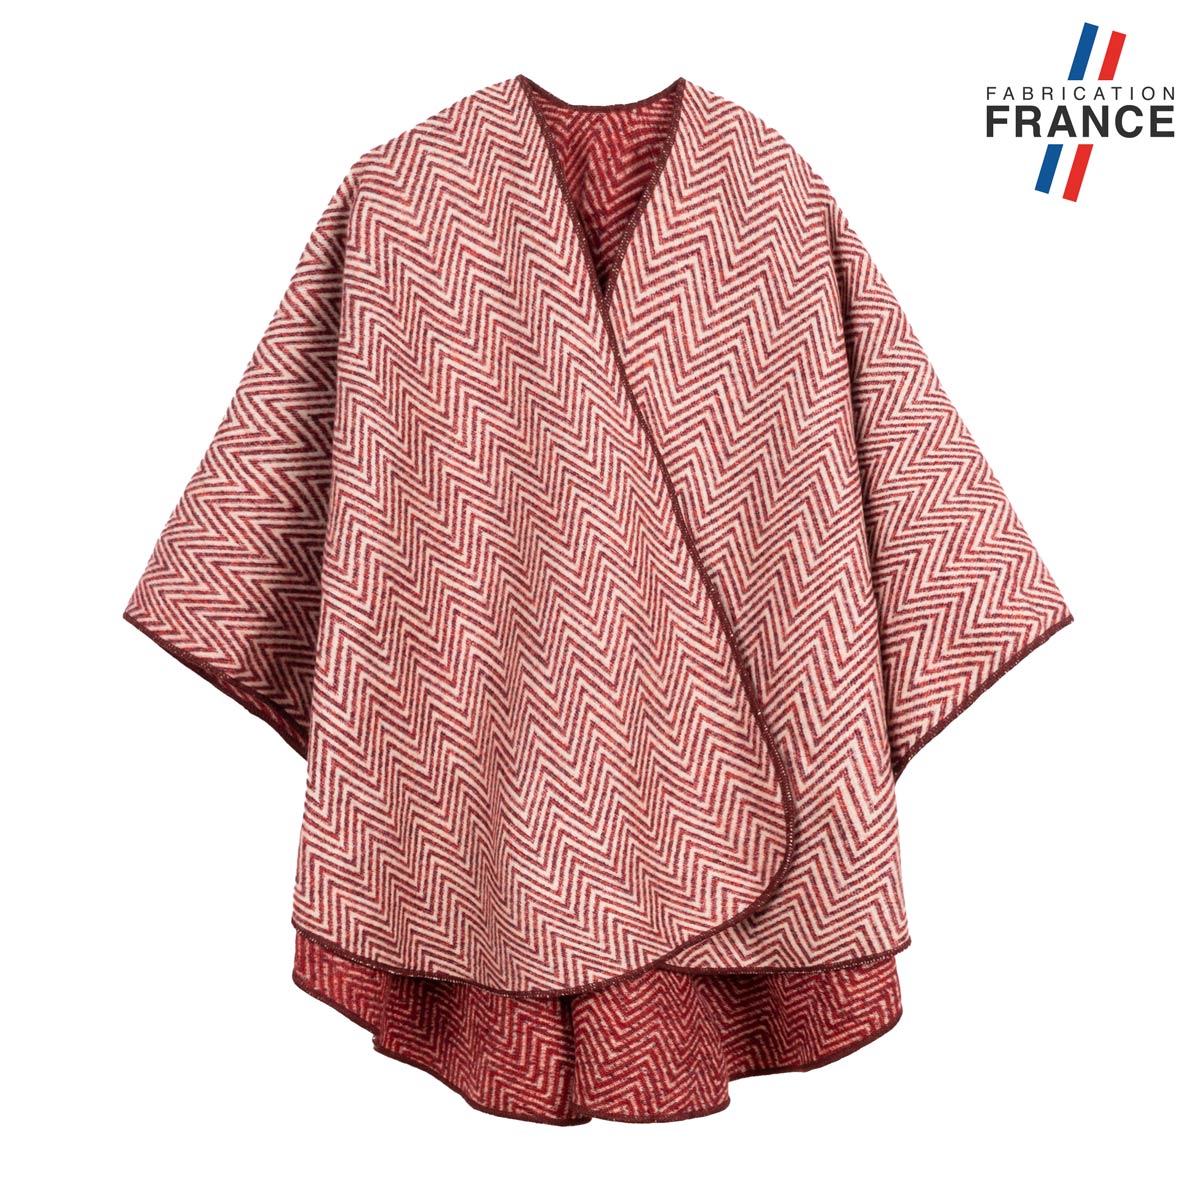 Poncho-femme-rouge-bordeaux-made-in-france--AT-07027_F12-2FR